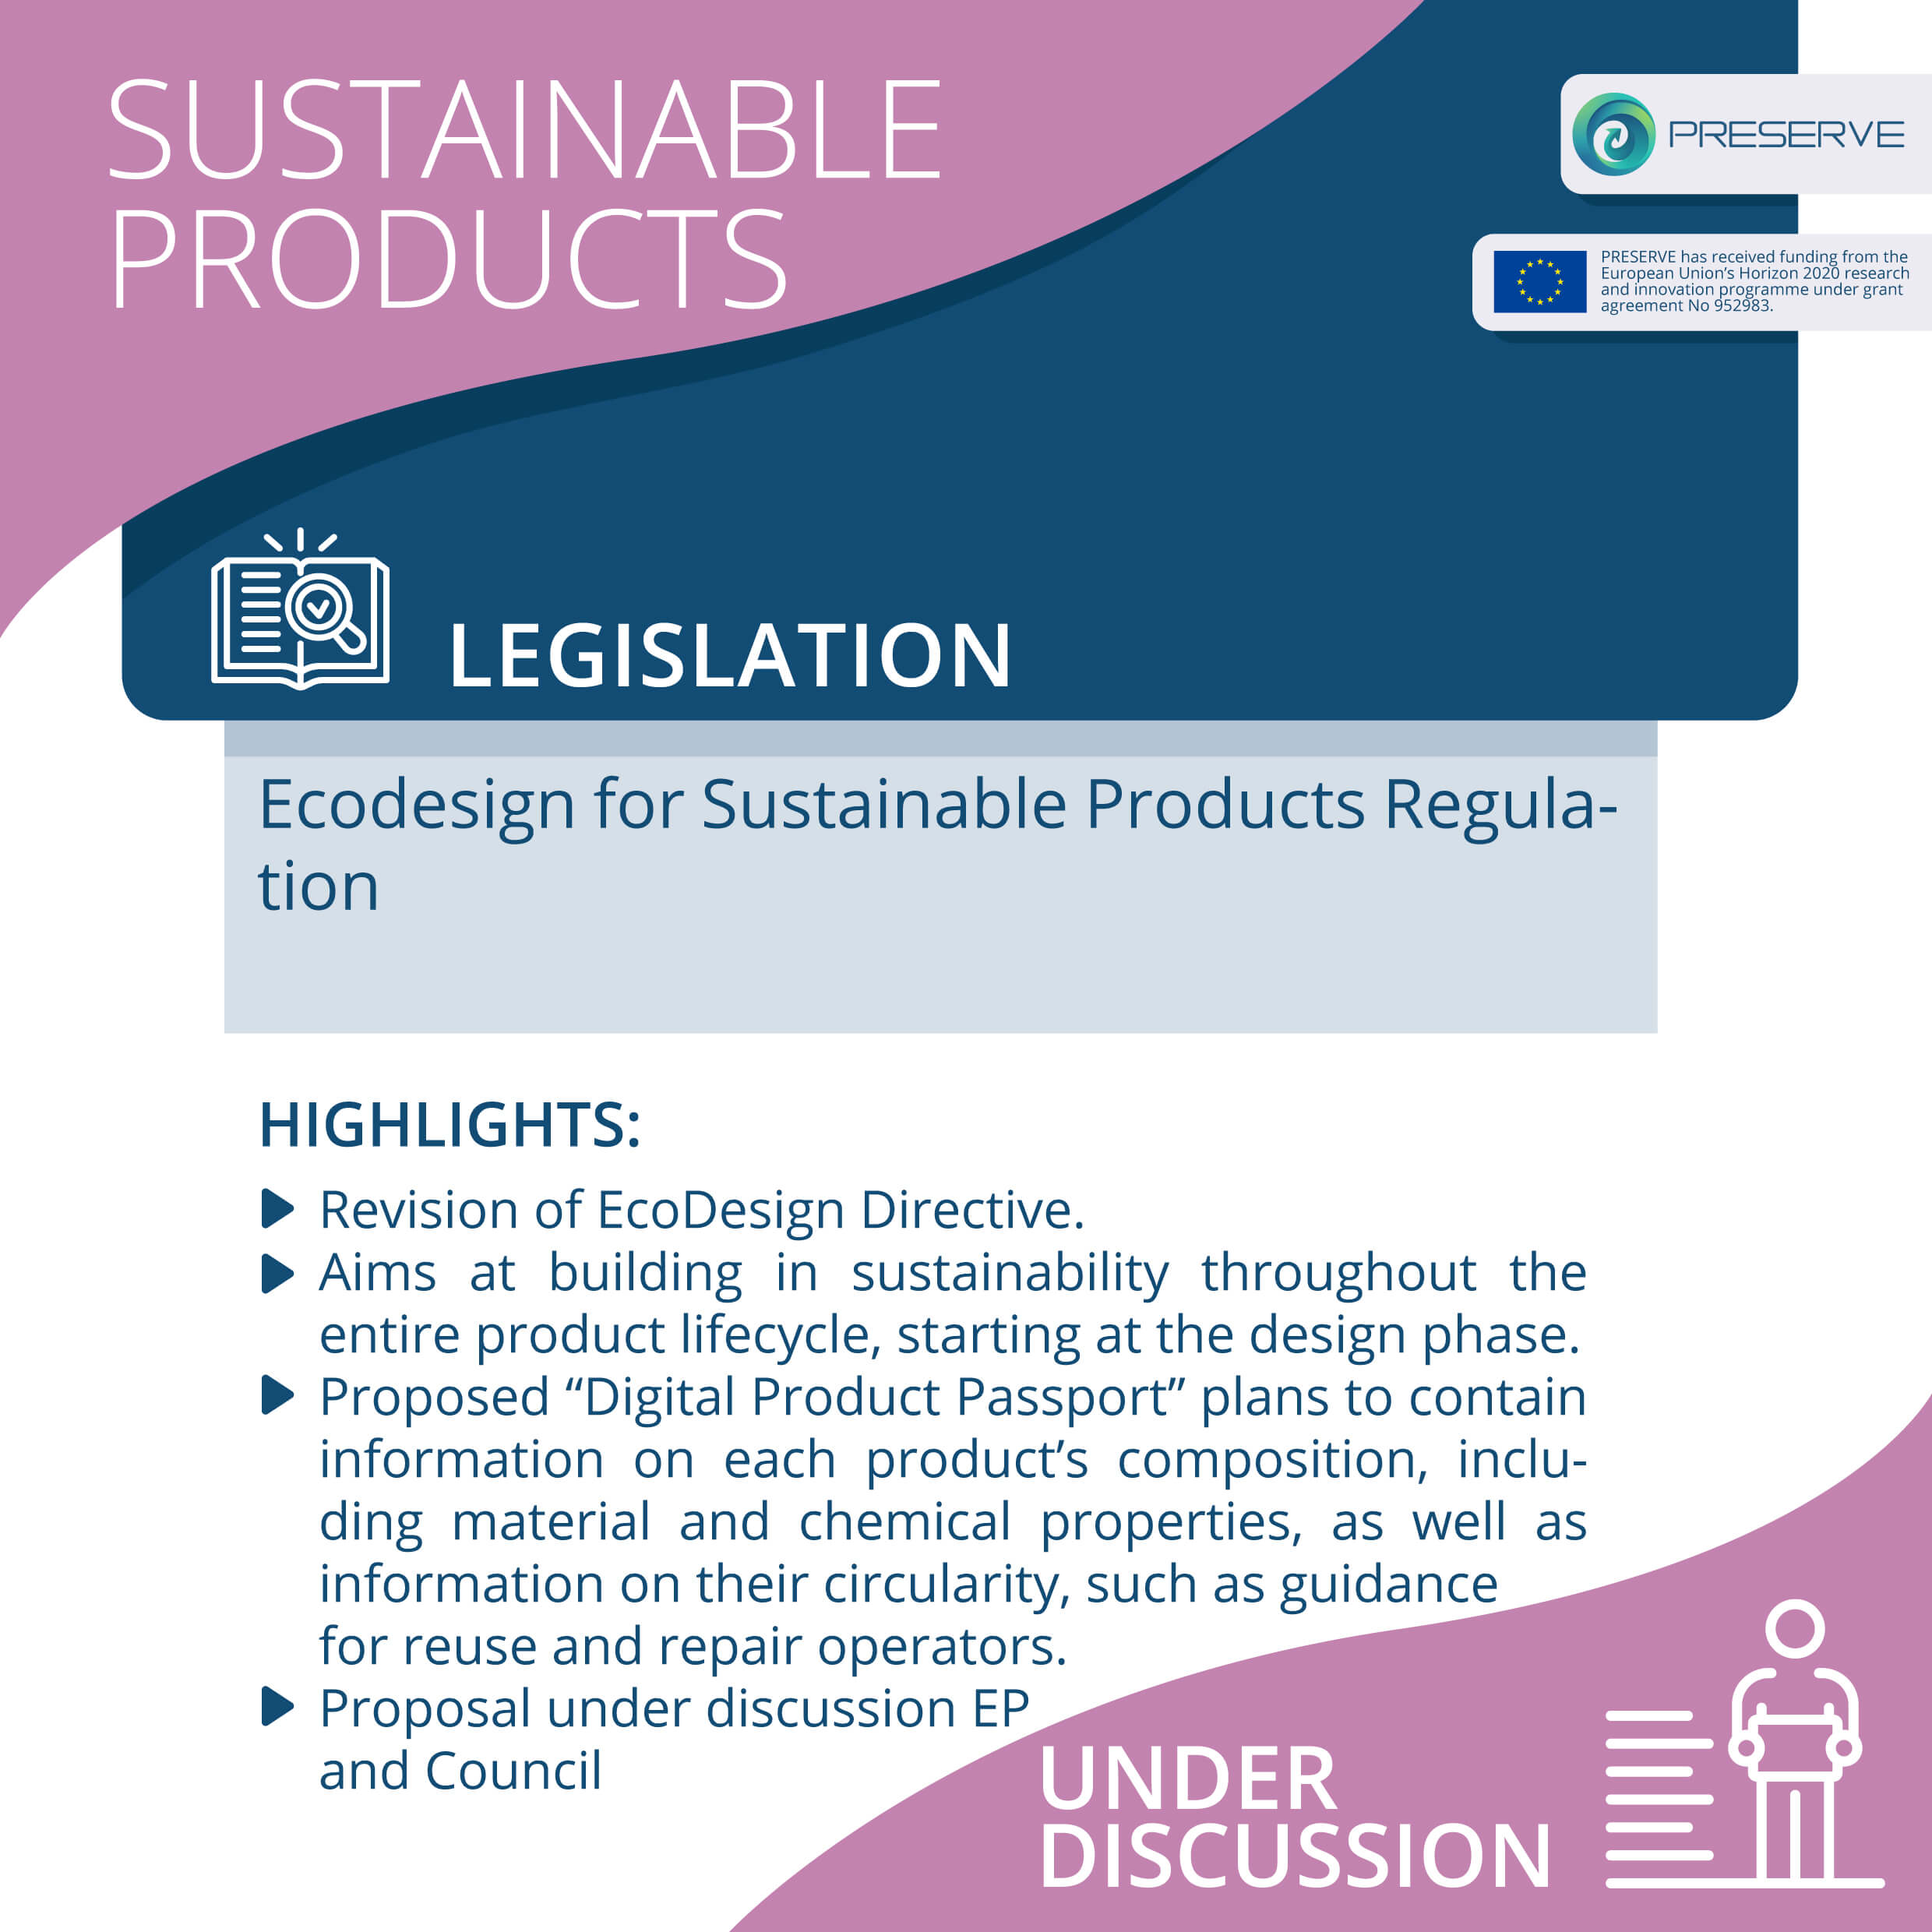 Sustainable product laws and PRESERVE